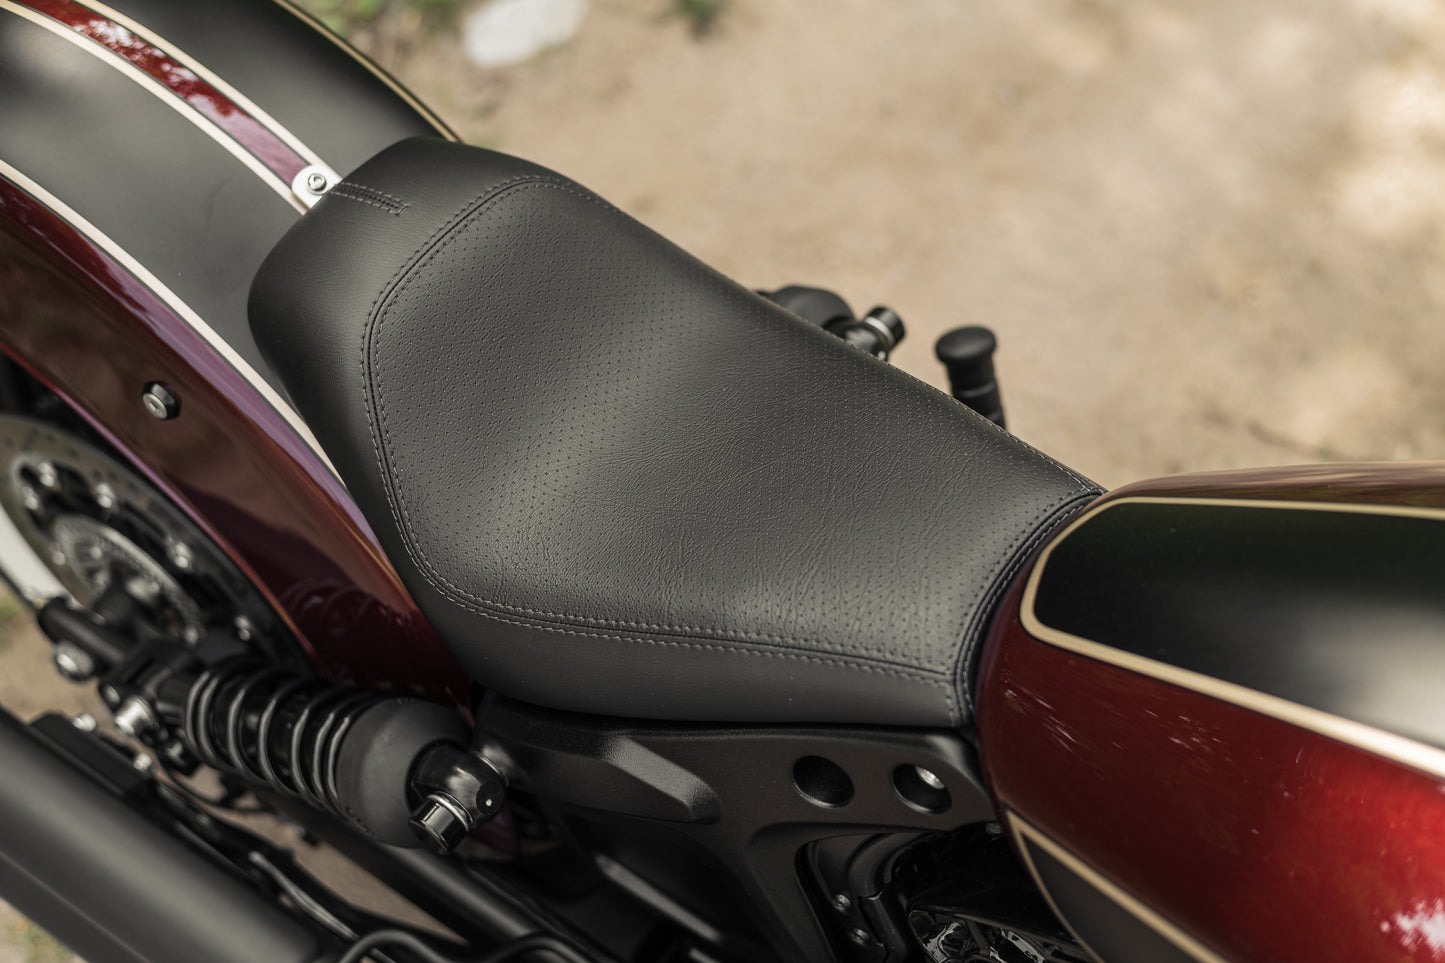 Harley Davidson motorcycle with Killer Custom Indian scout solo seat from above neutral background